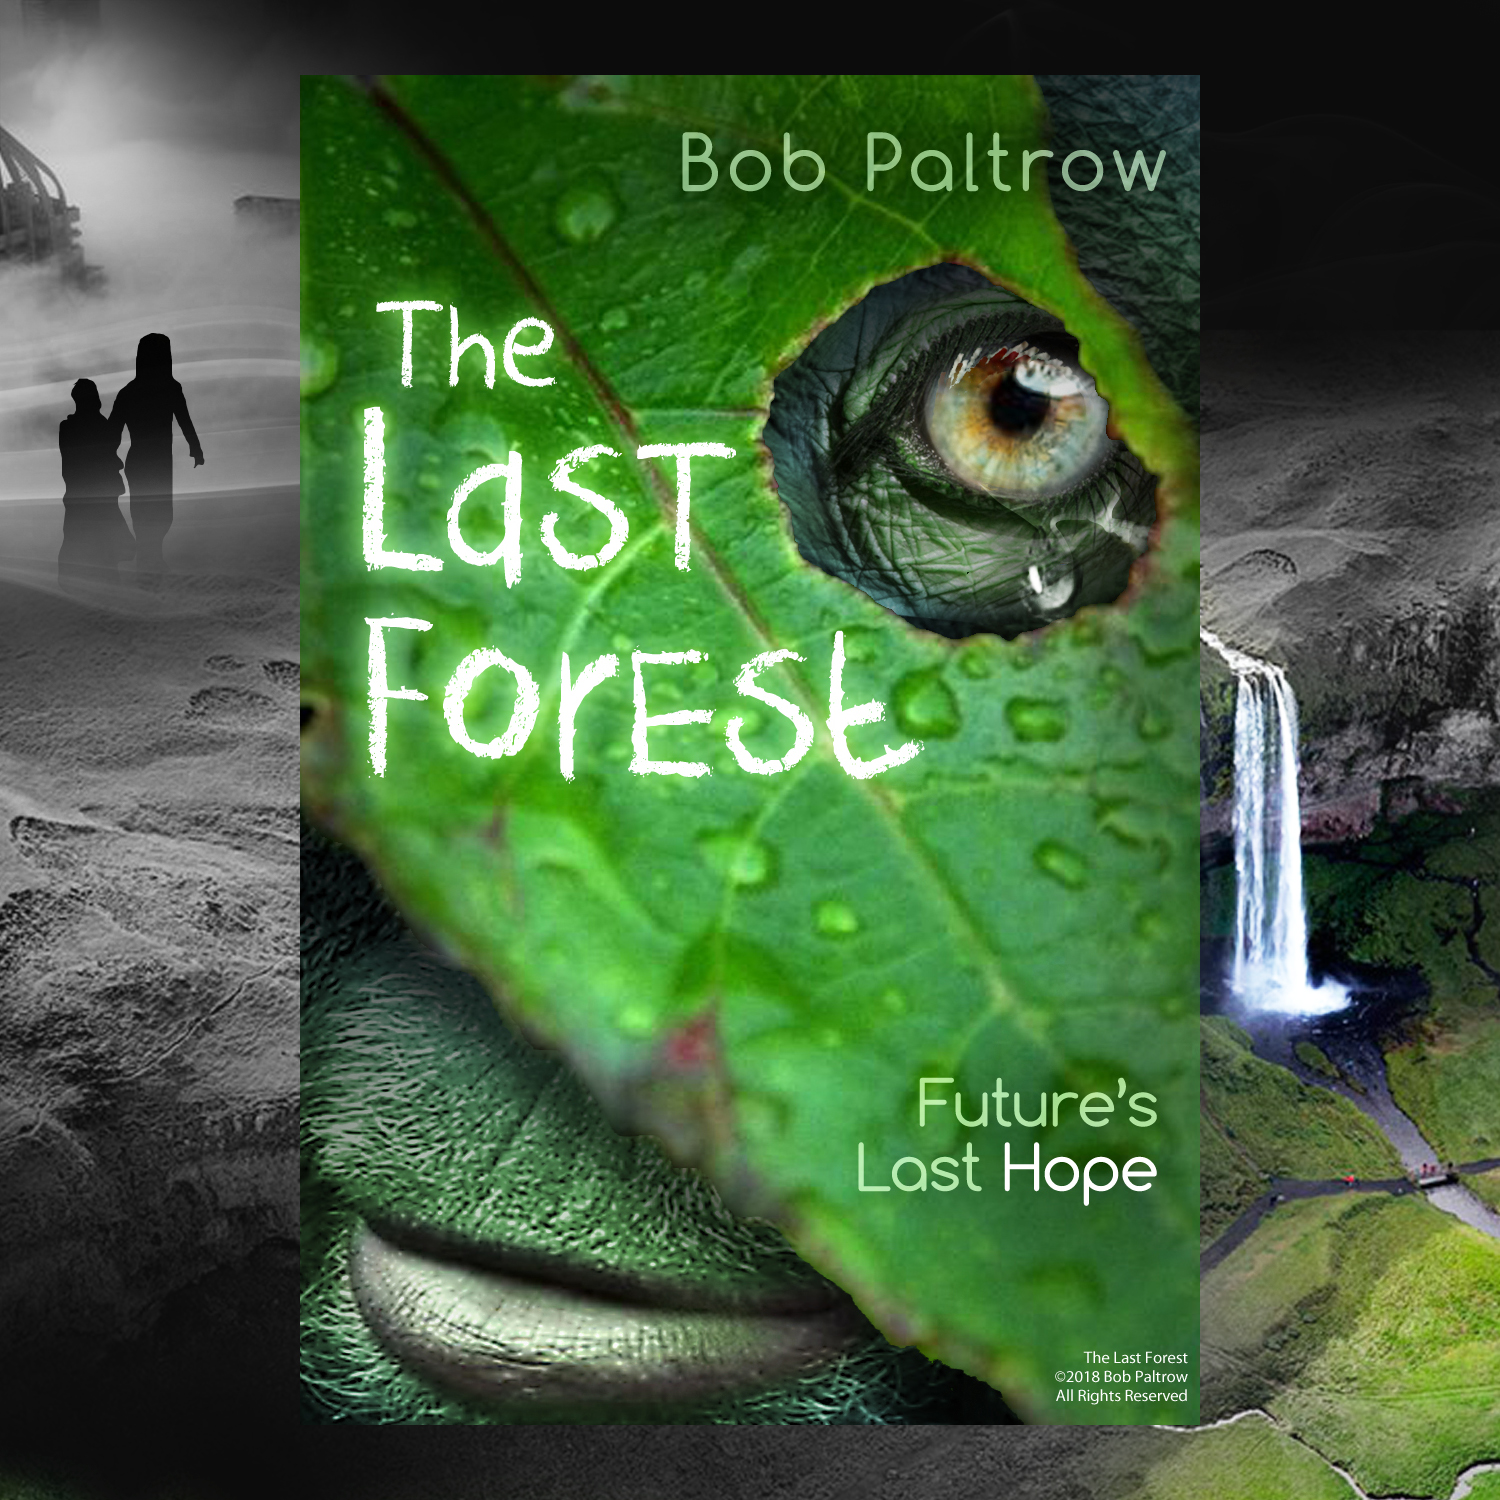 Book Preview — “The Last Forest”